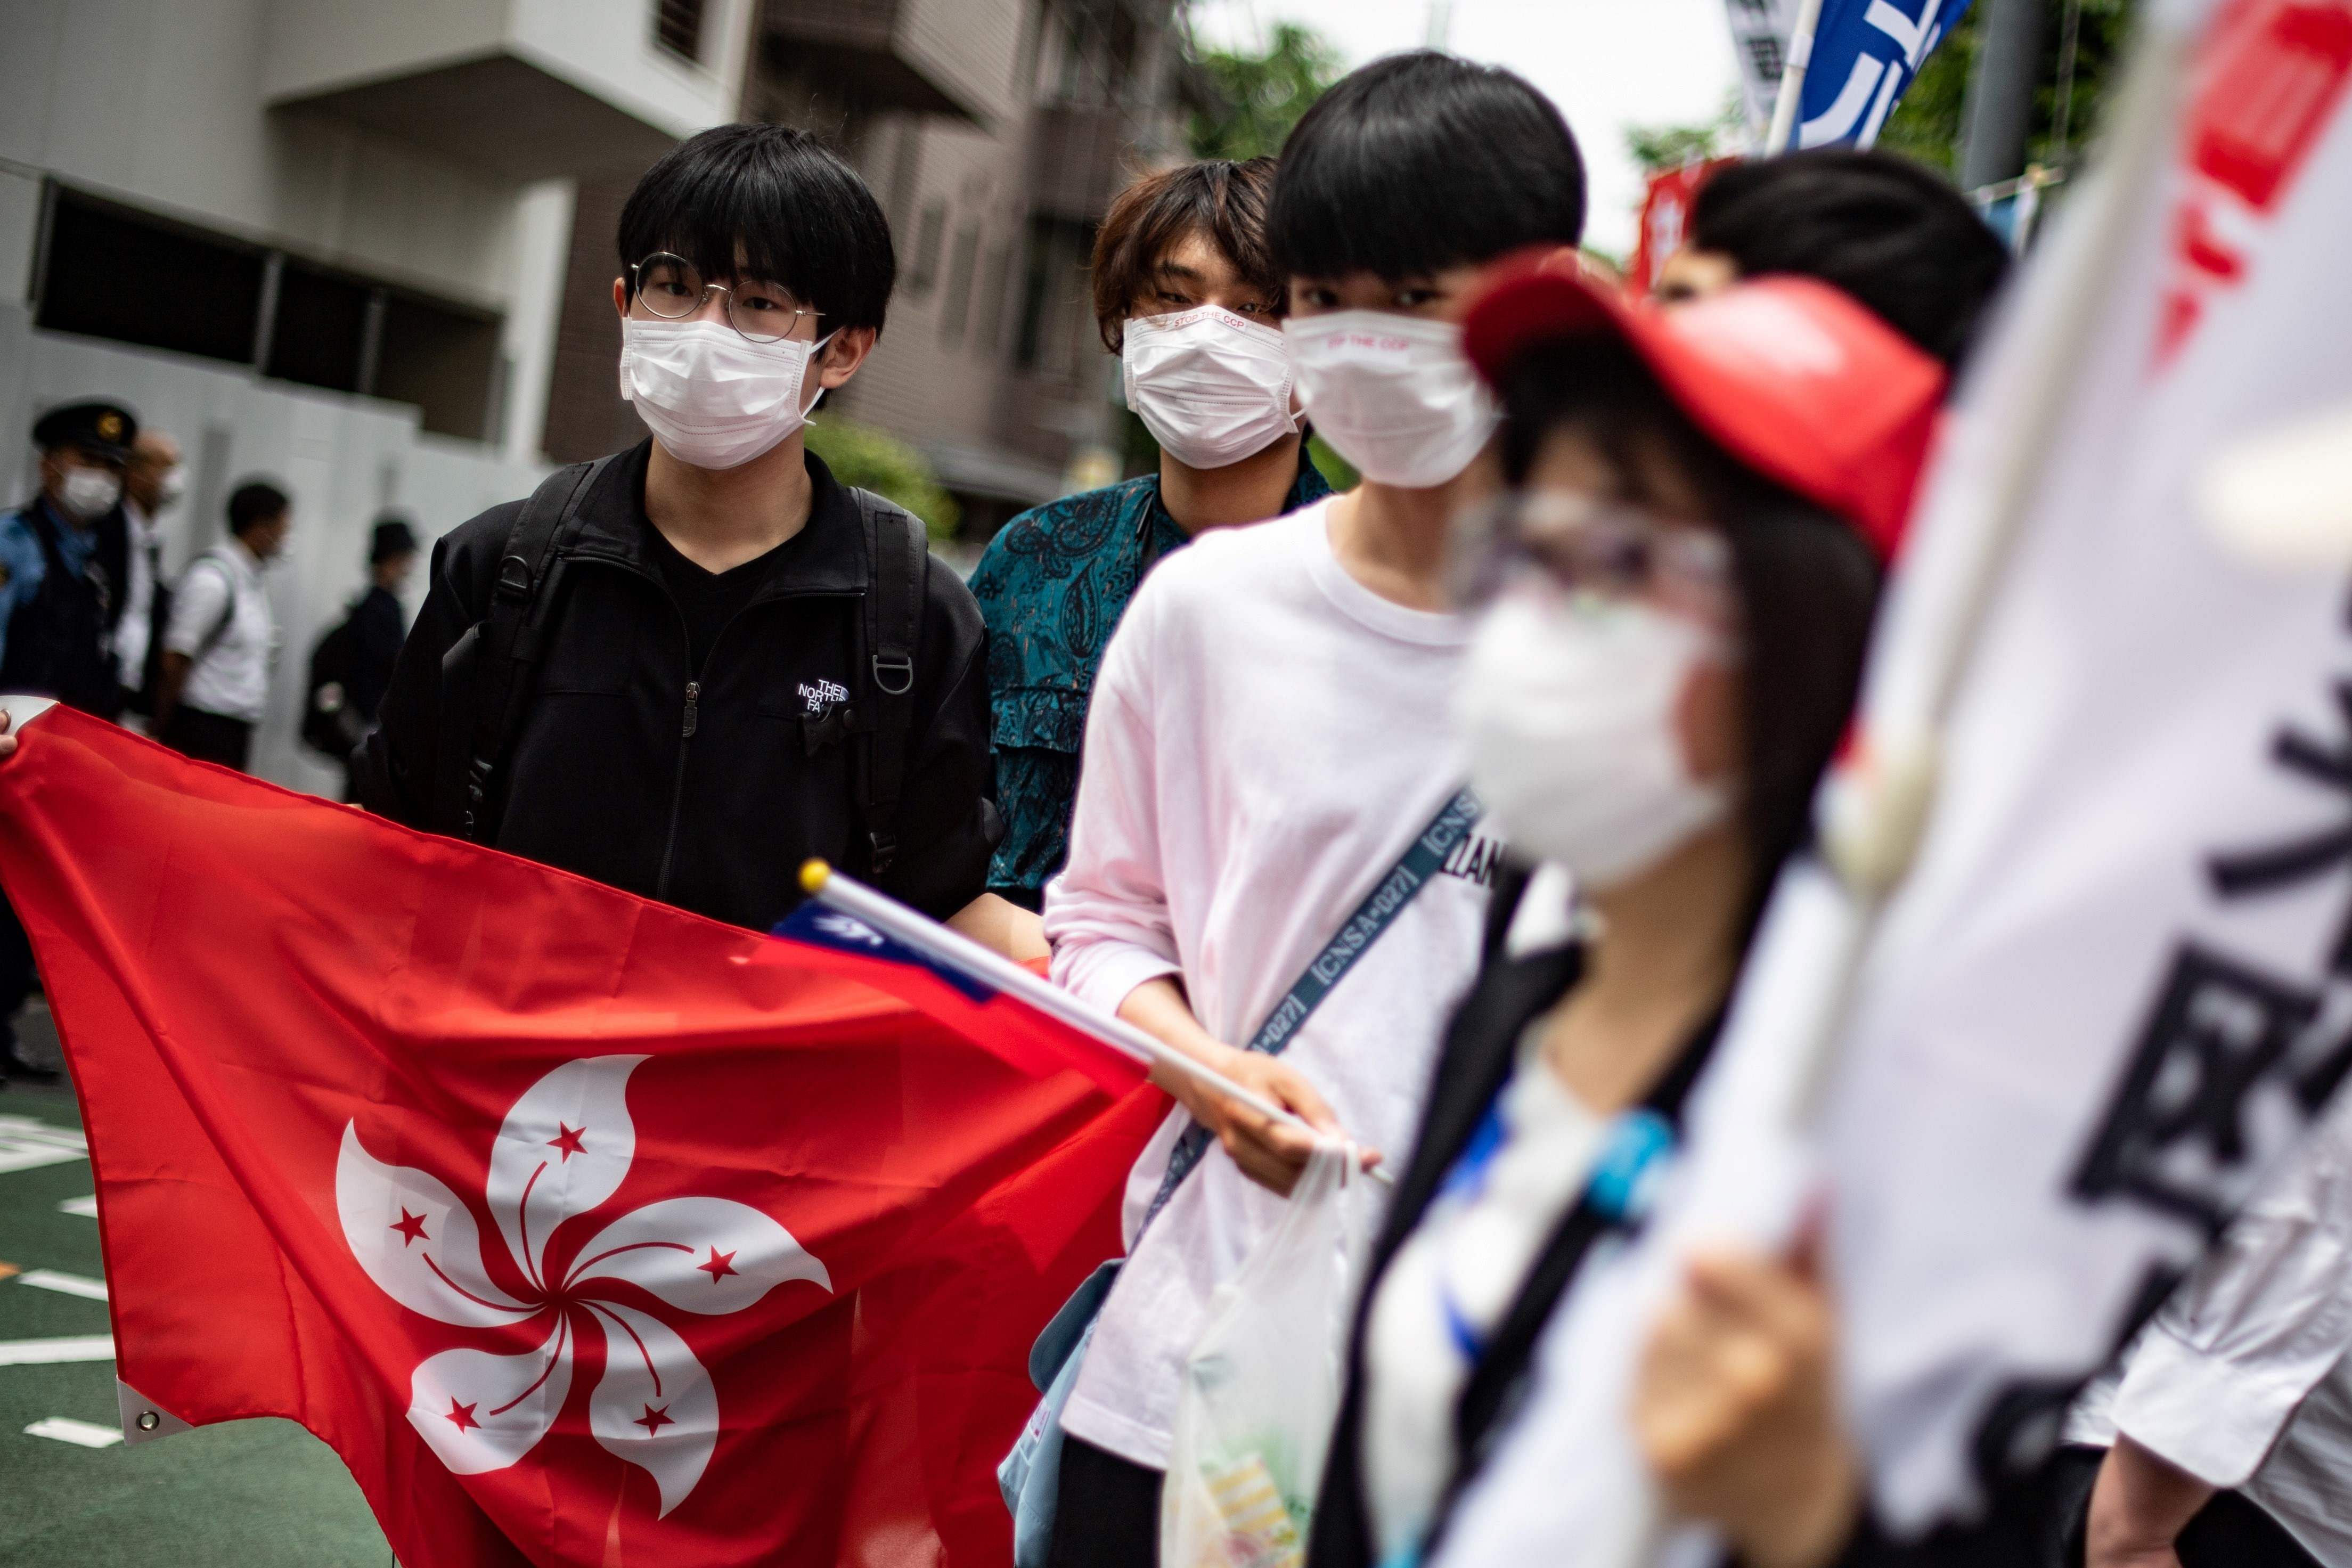 A group of pro-democracy activists hold a Hong Kong flag as they march to the Chinese embassy to mark the 31st anniversary of the June 4, 1989 crackdown on Beijing pro-democracy protest, in Tokyo on June 4, 2020. (Photo by AFP)